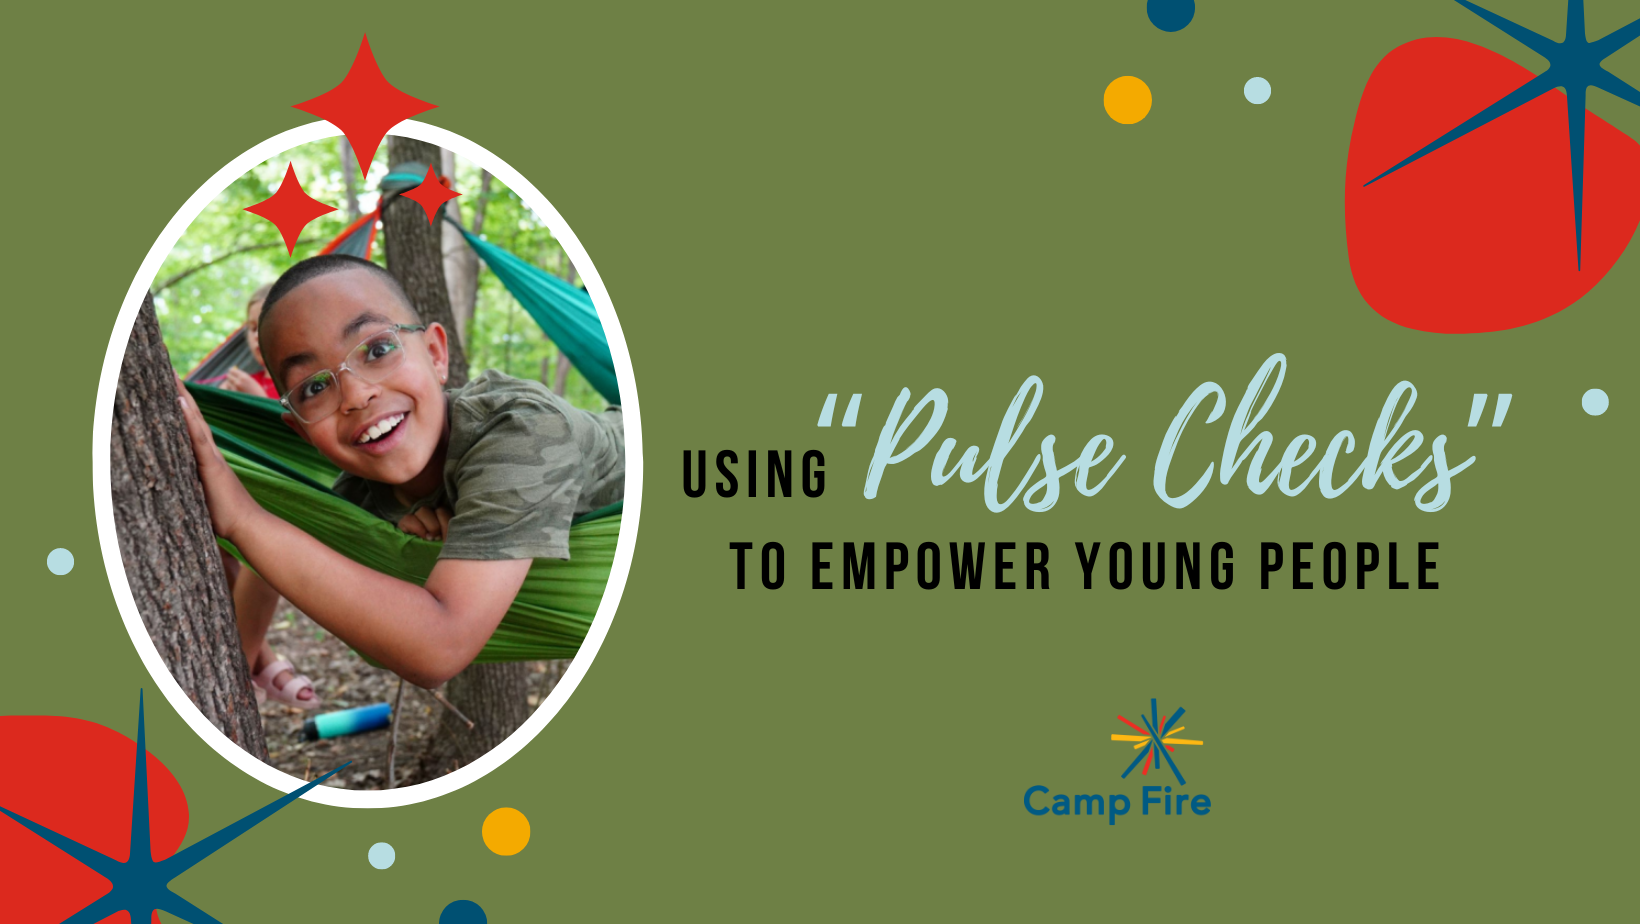 Using “Pulse Checks” to Empower Young People, a Camp Fire blog